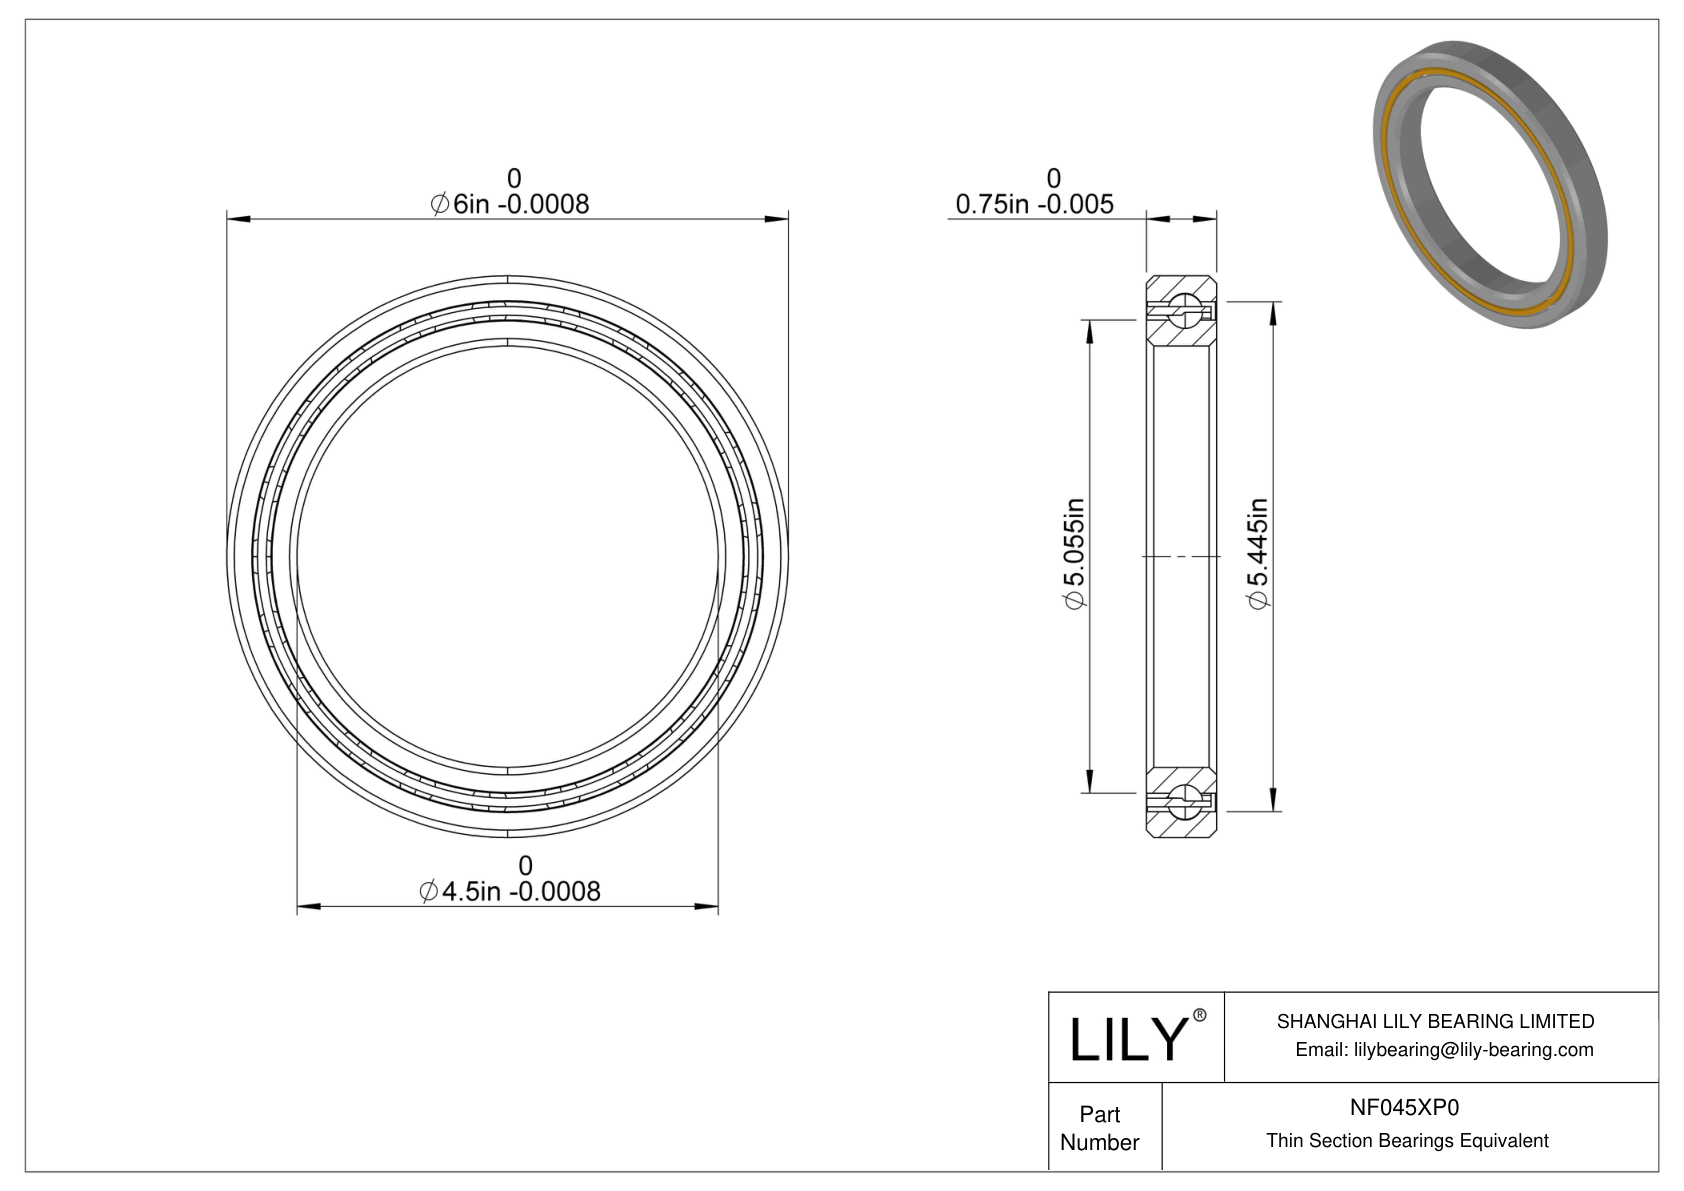 NF045XP0 Constant Section (CS) Bearings cad drawing